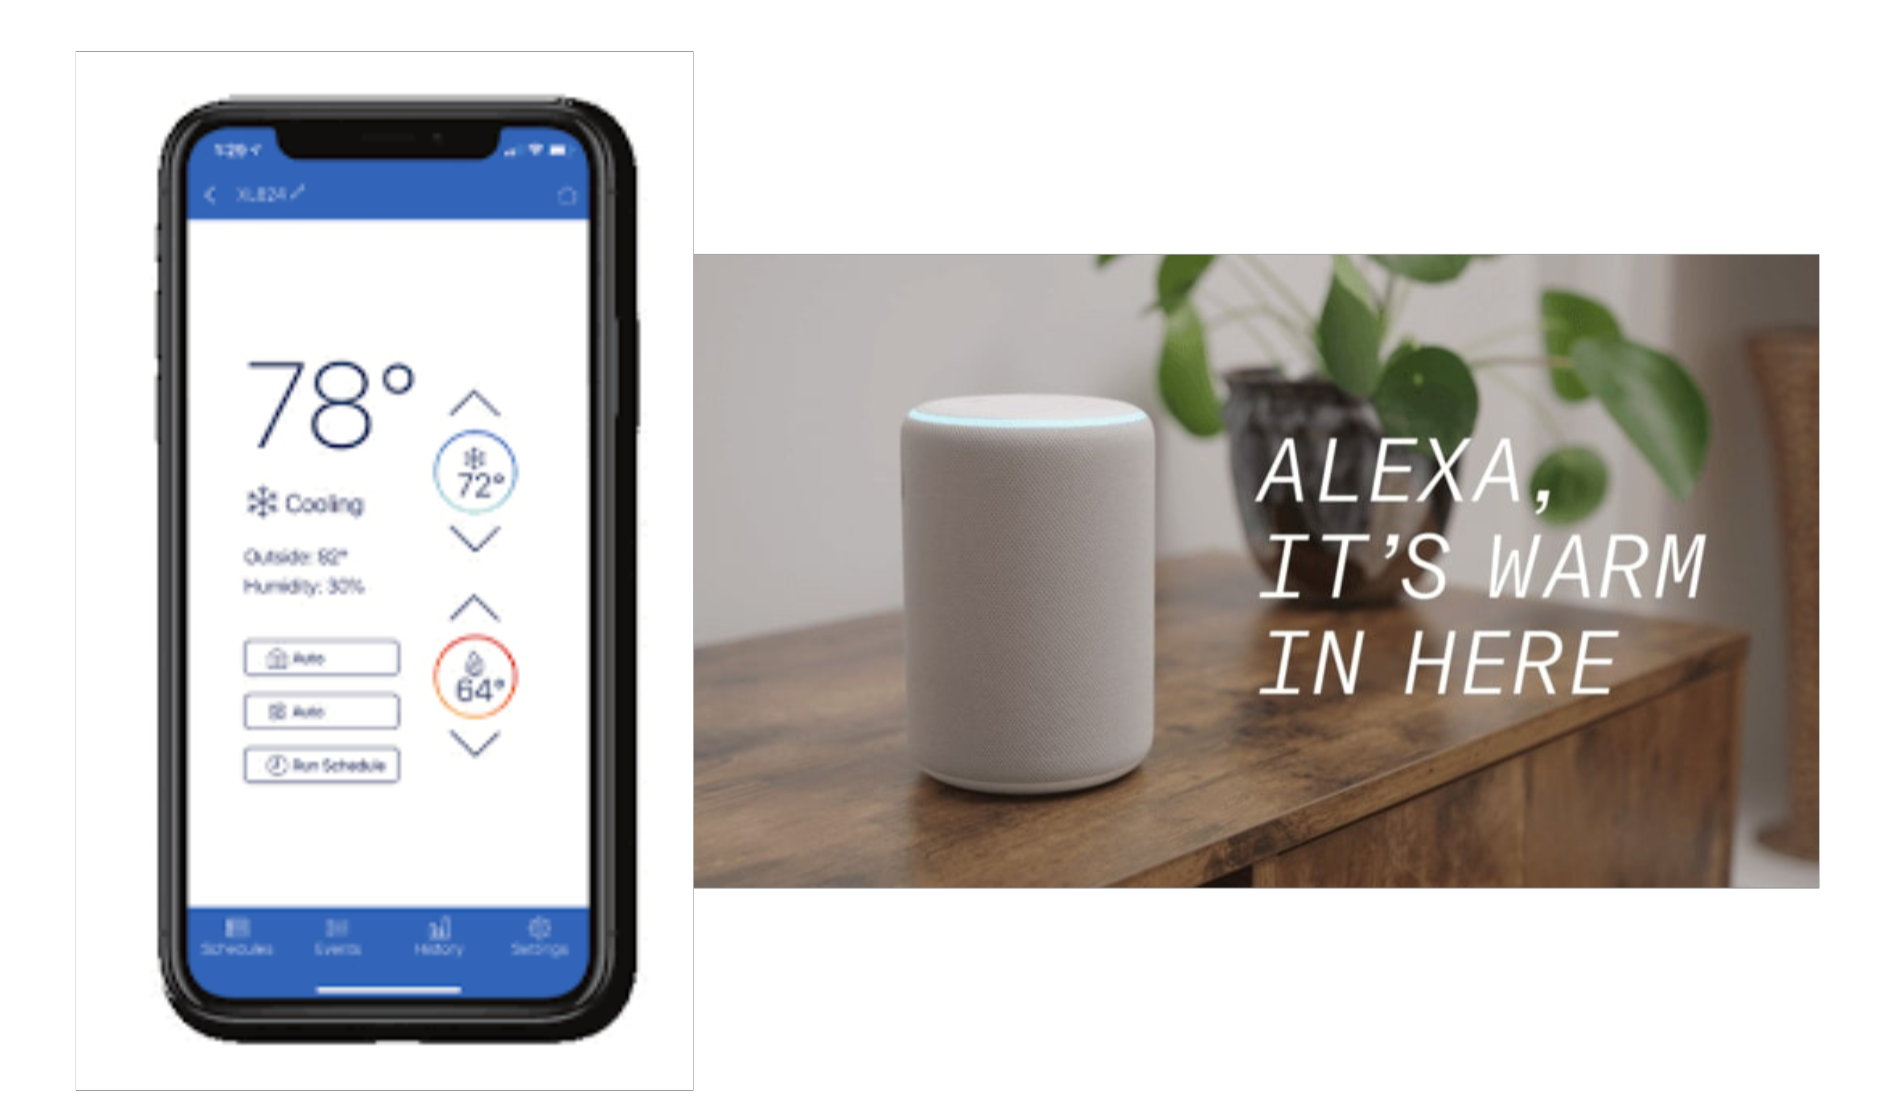 Trane app controls your homes temperature at your own convenience. Also accessible through Amazon Alexa. 